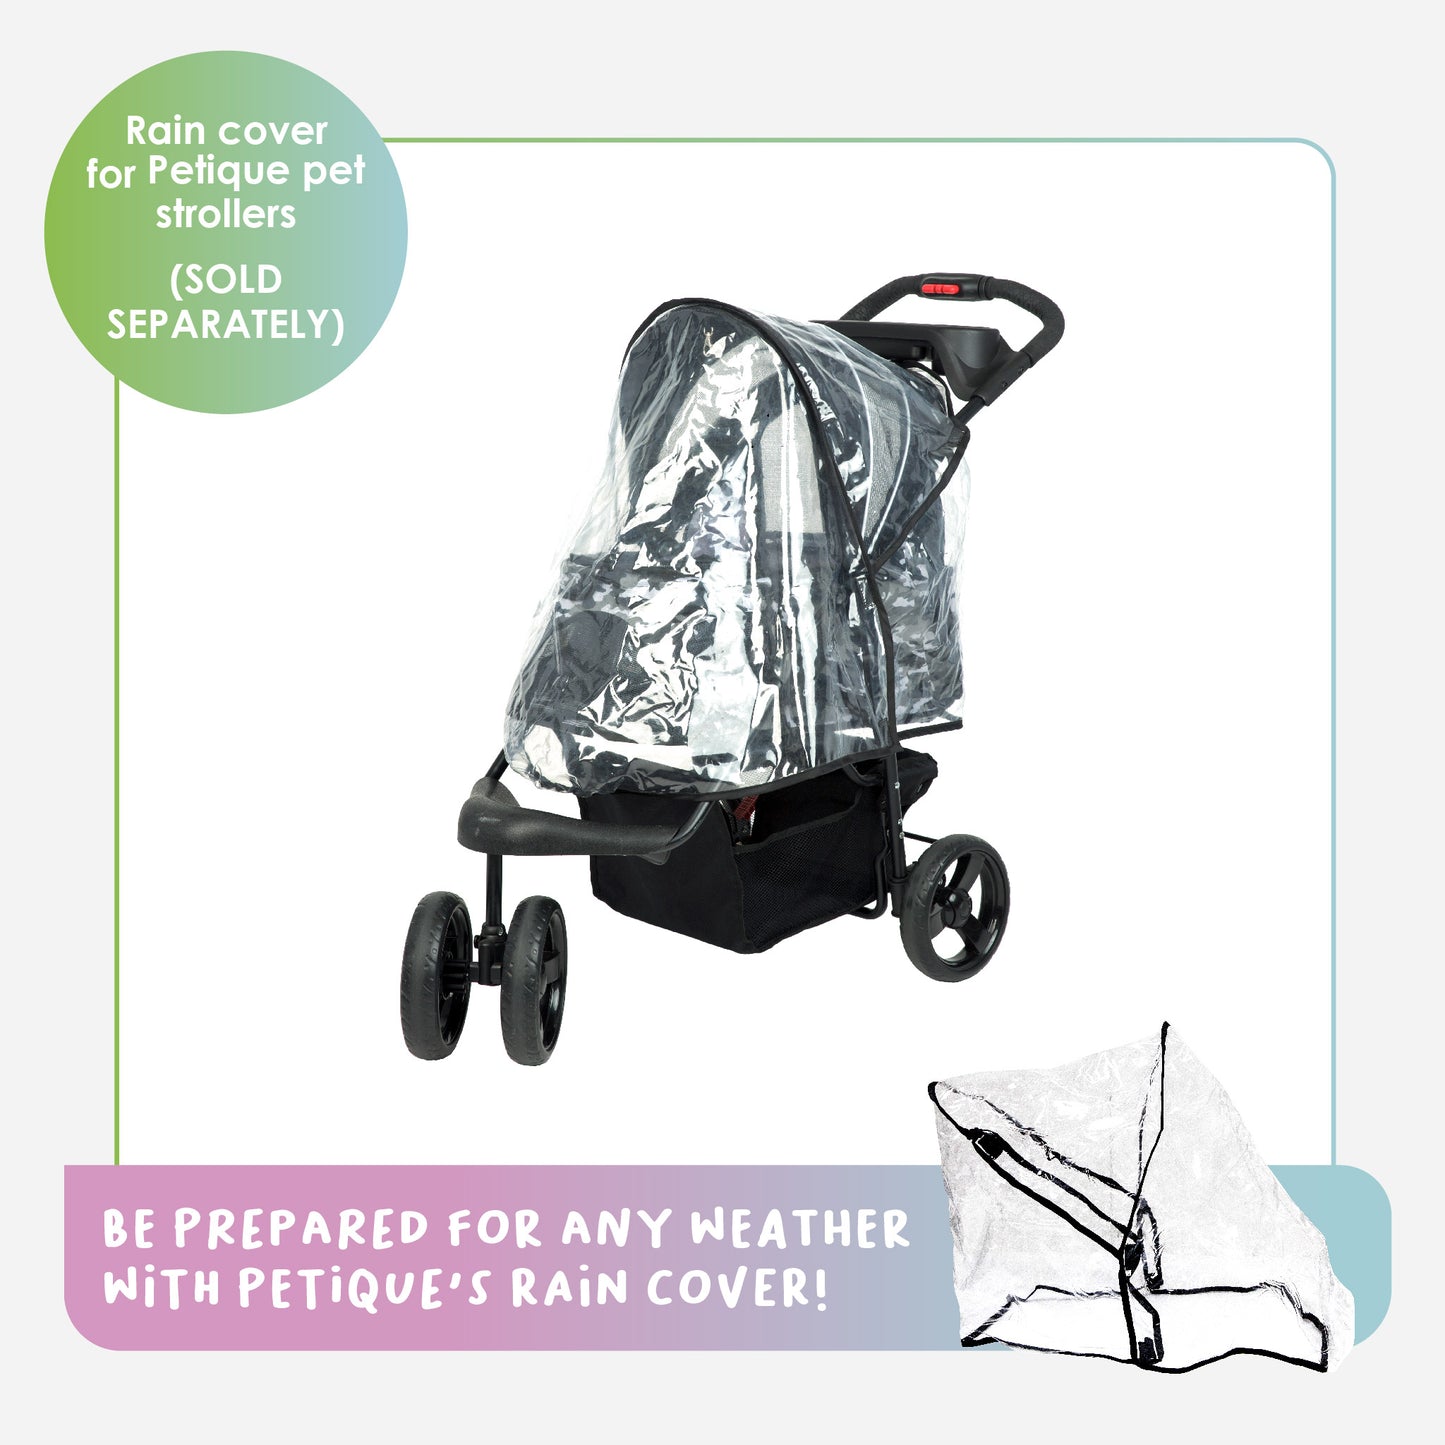 rain cover and durable pet stroller